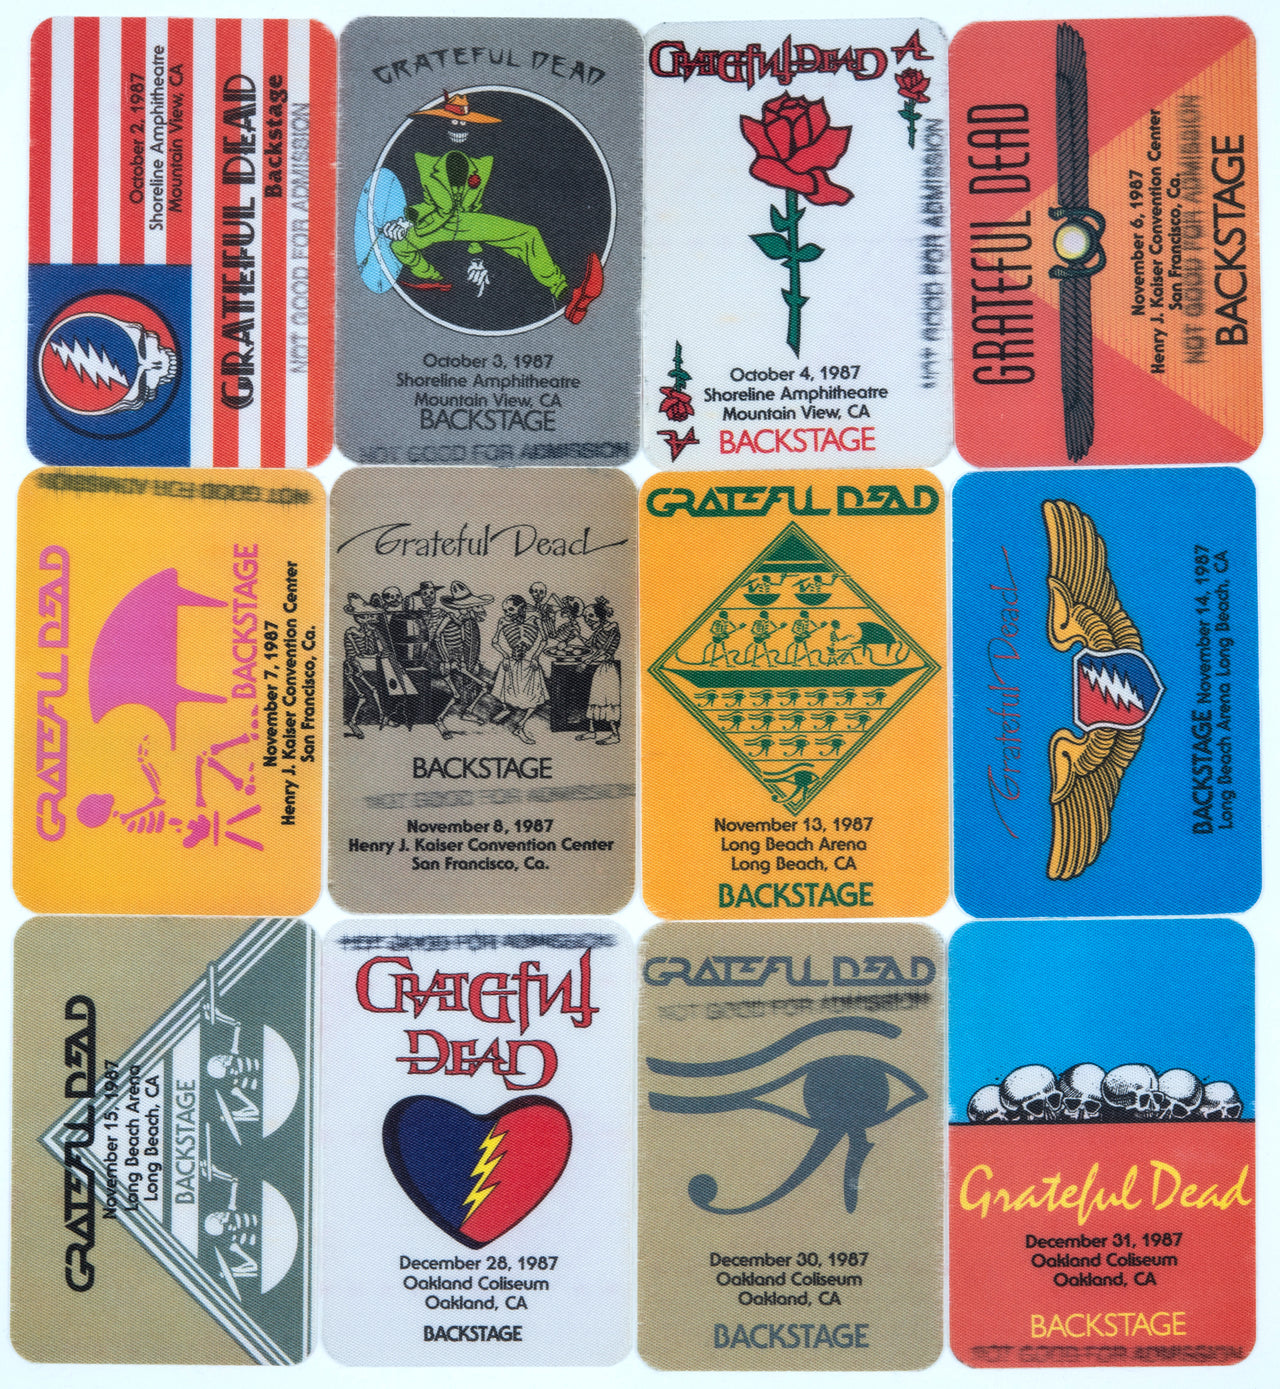 Grateful Dead Backstage Passes (10/2/1987 - 12/31/1987) from Dan Healy